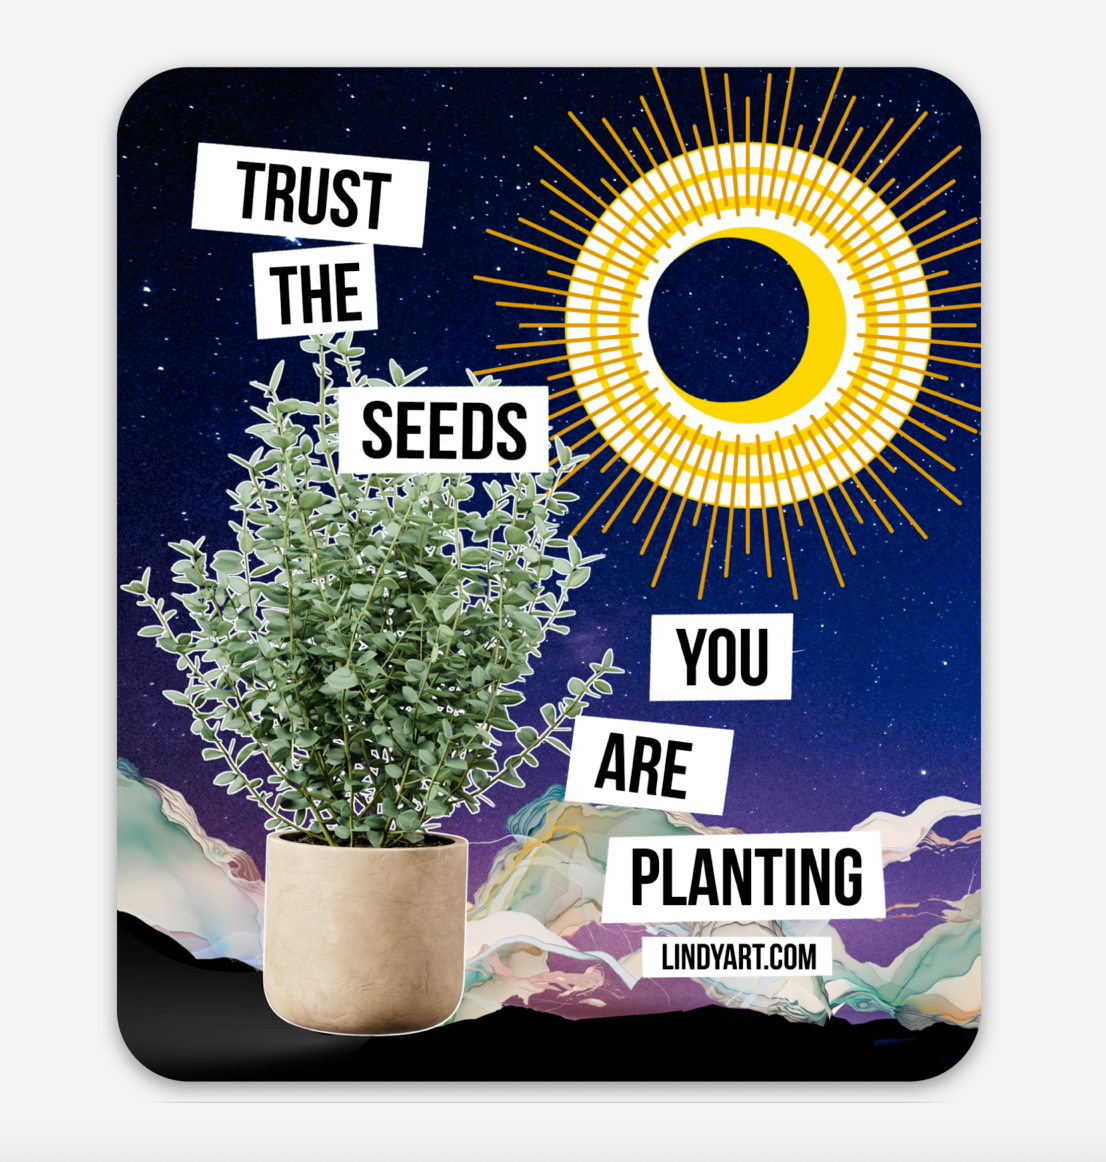 Trust the seeds you are planting